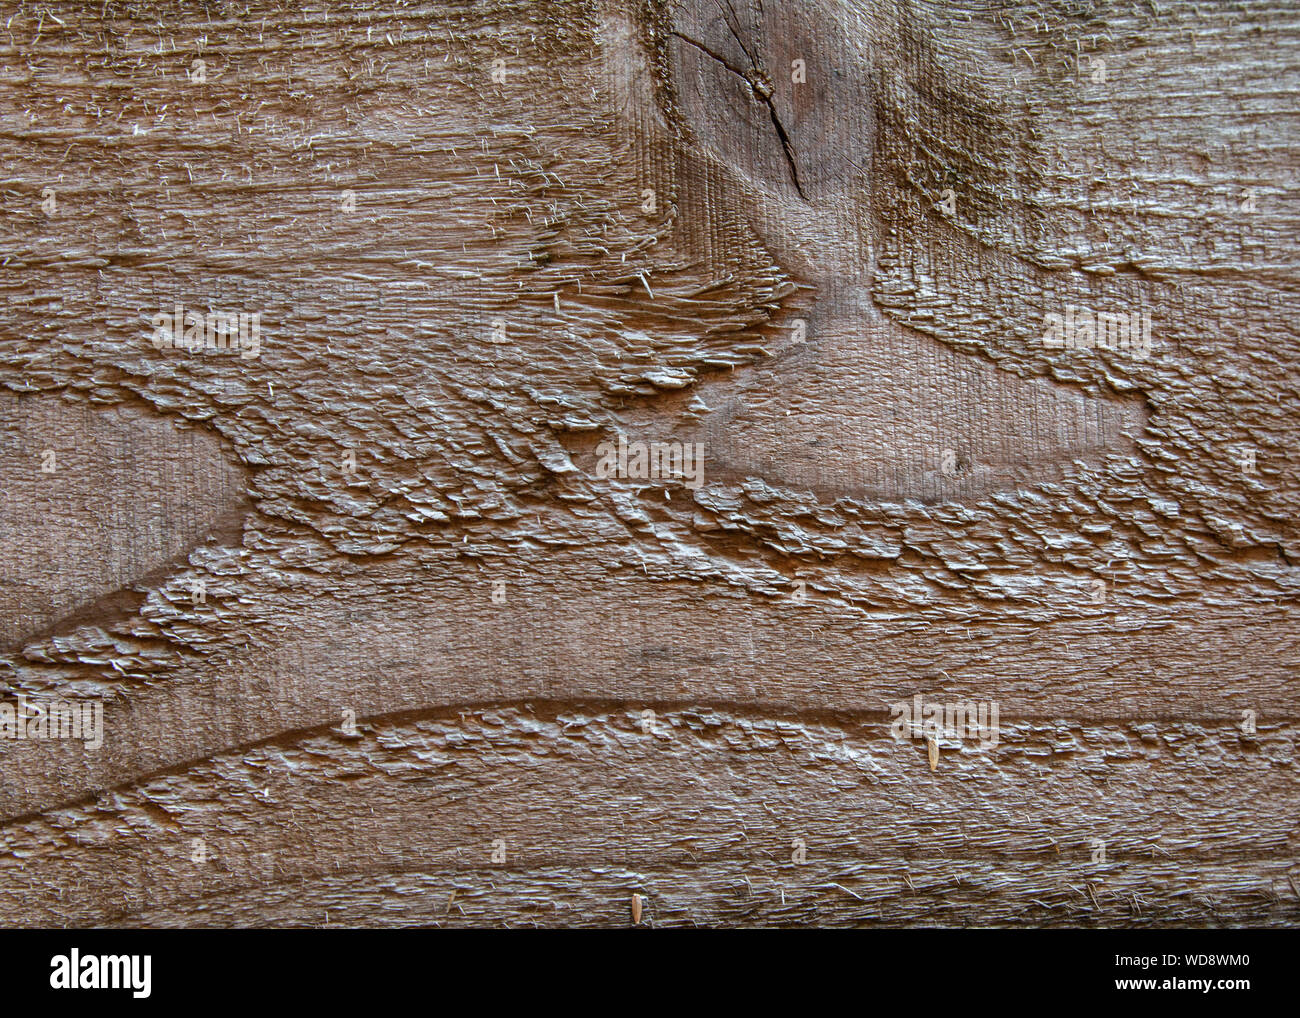 Close up of wood grain on a fence post Stock Photo